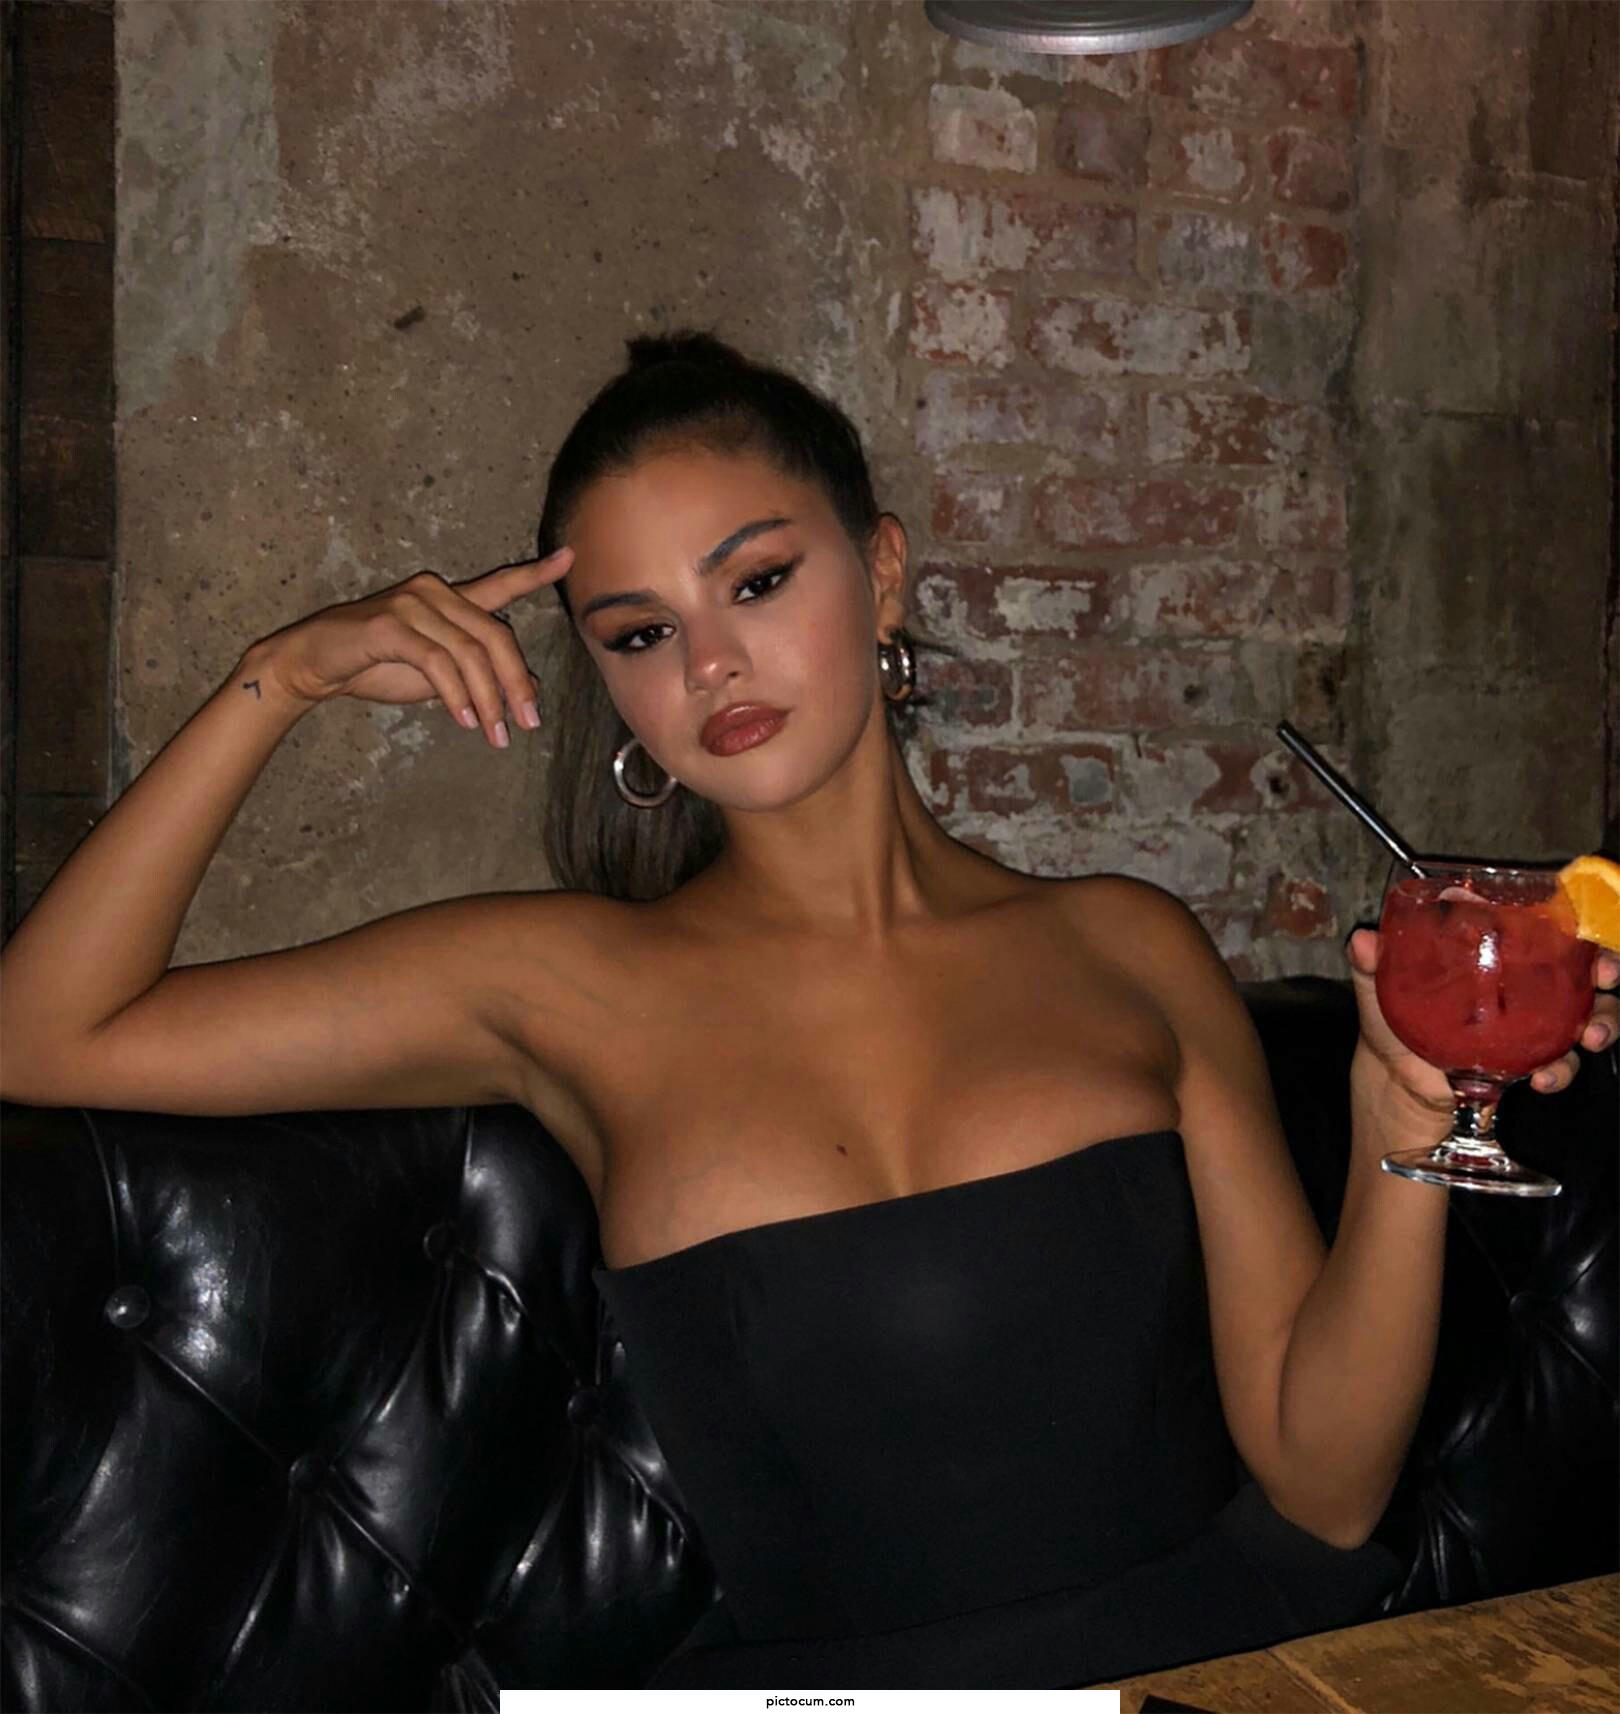 Here’s the start of your night with Selena. How does it end?